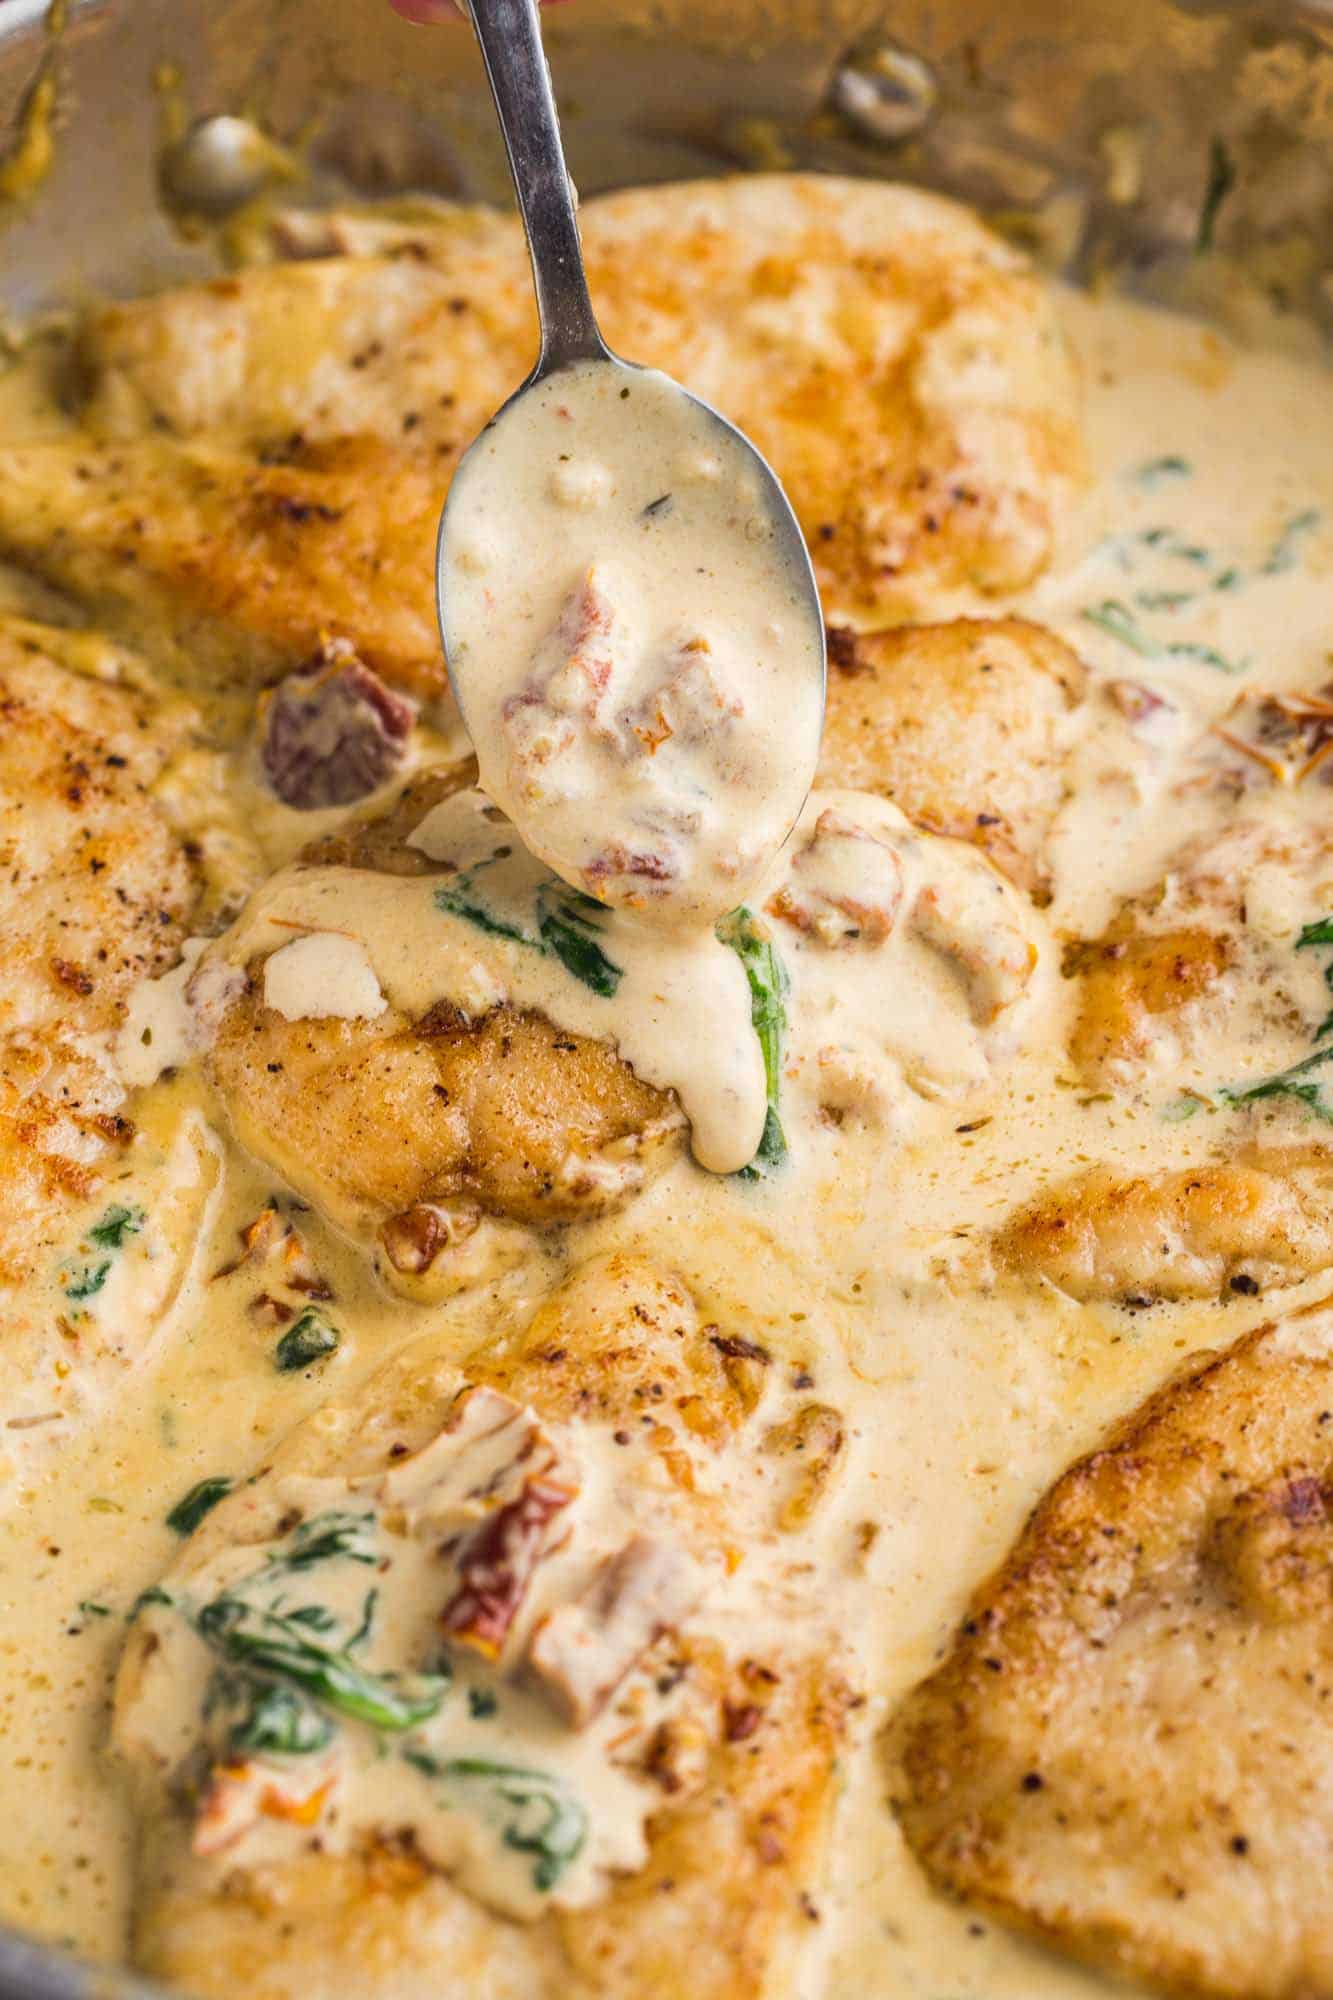 Drizzling cream sauce over chicken with a spoon